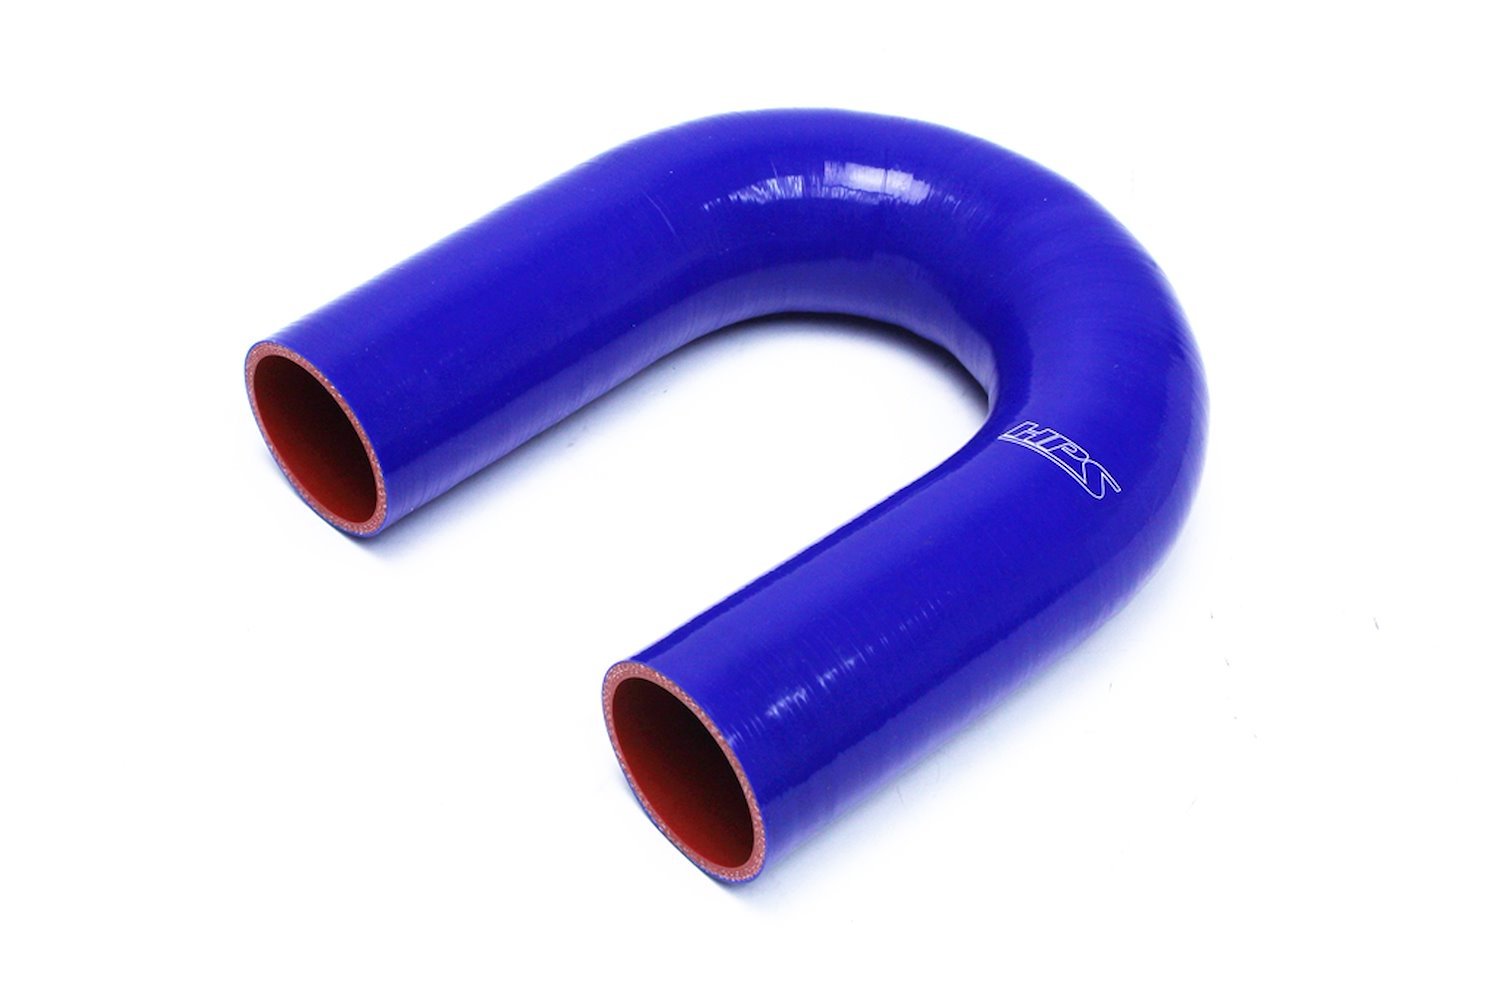 HTSEC180-238-BLUE Silicone 180-Degree U Bend Elbow Hose, High-Temp 4-Ply Reinforced, 2-3/8 in. ID, Blue